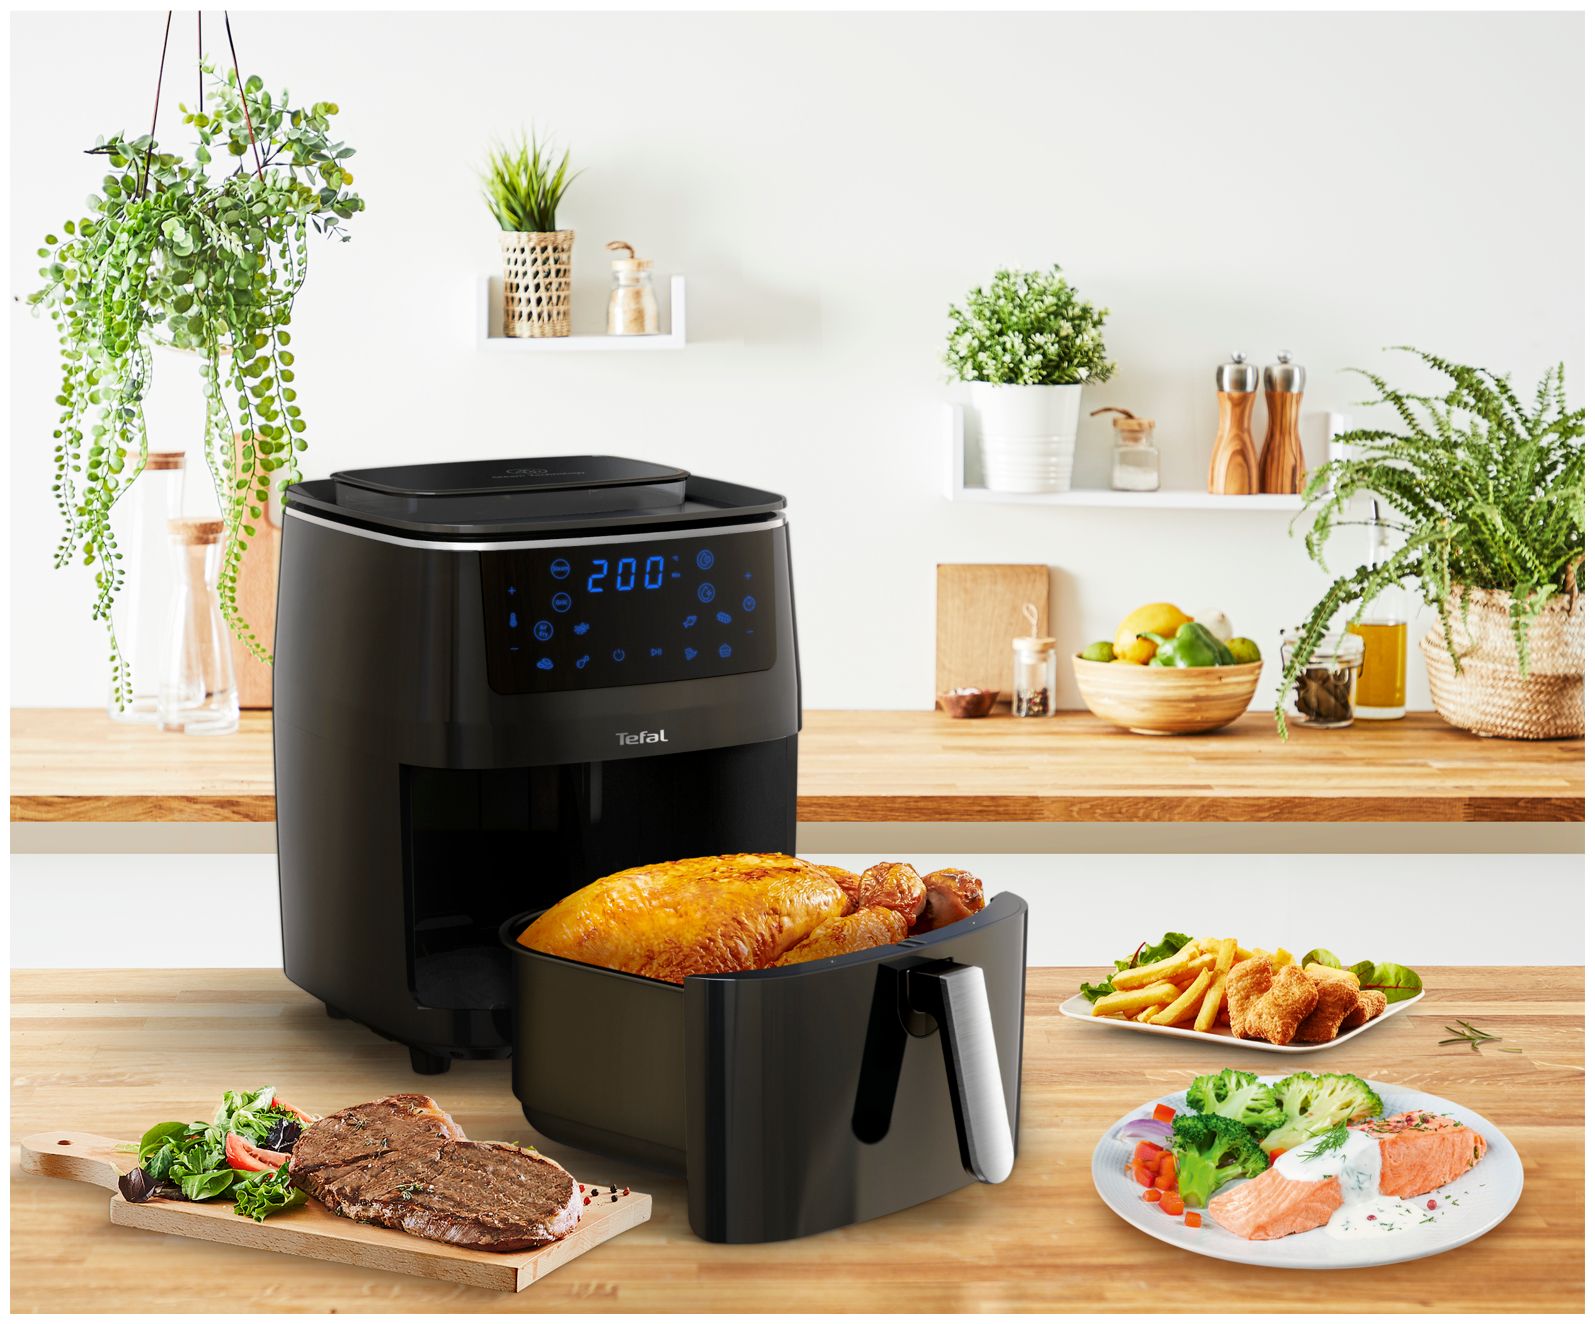 Tefal FW2018 Easy 1700 Steam bei & Grill Heißluftfritteuse Fry W Boomstore